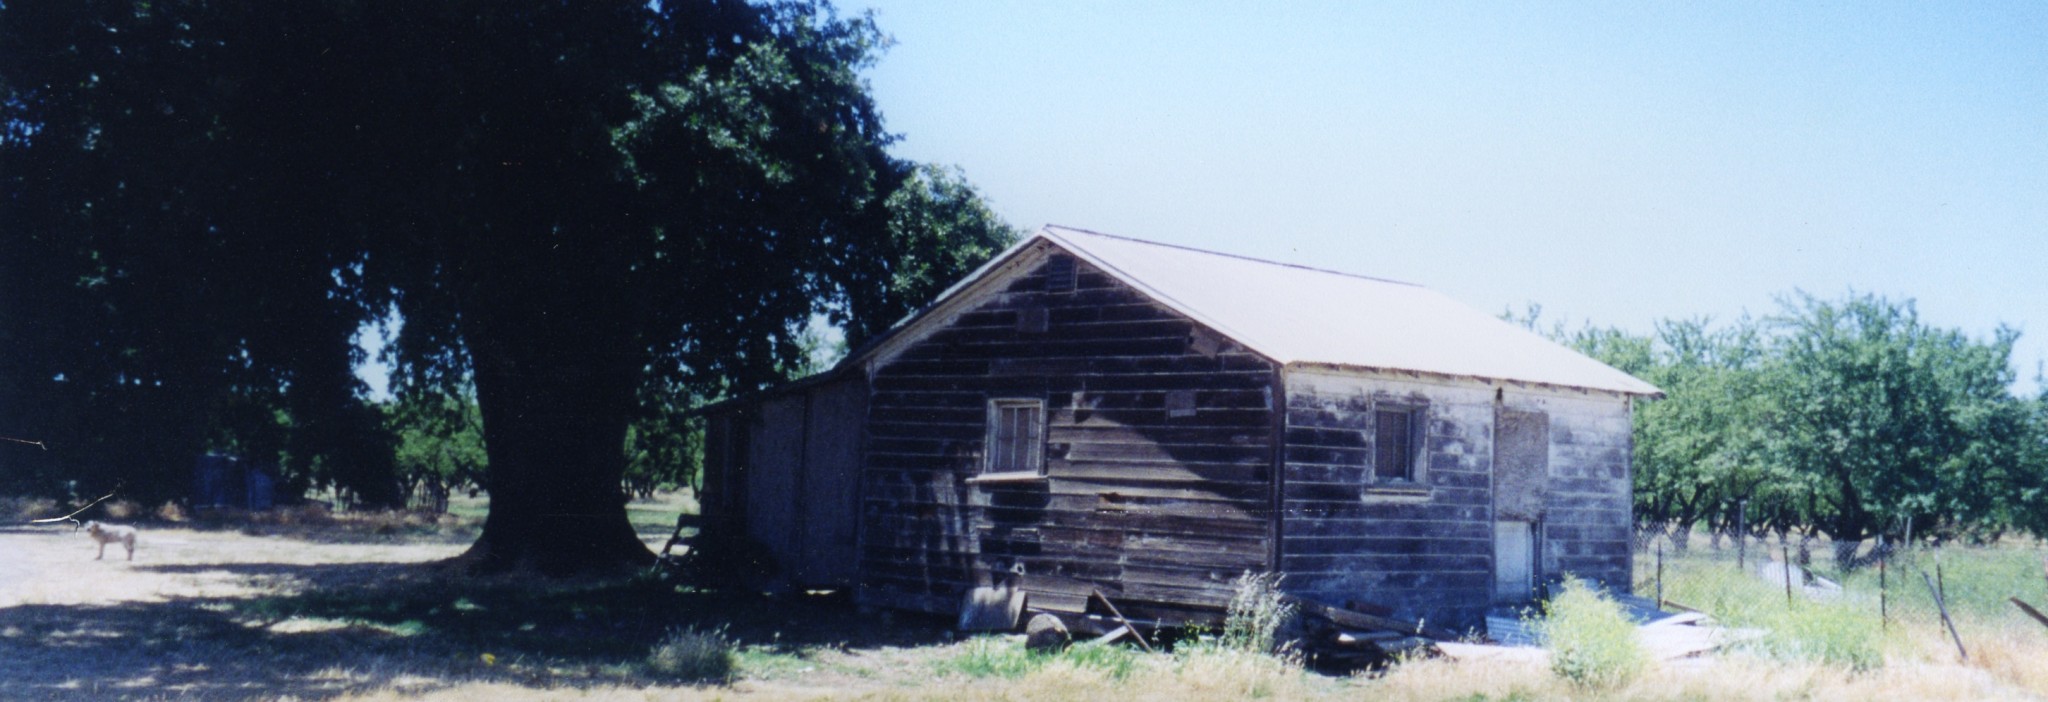 First House Where Didar Singh Bains Lived in Labor Camp as a Farm Worker, Wheatland, CA. Courtesy of the Bains Family and the Punjabi American Heritage Society.